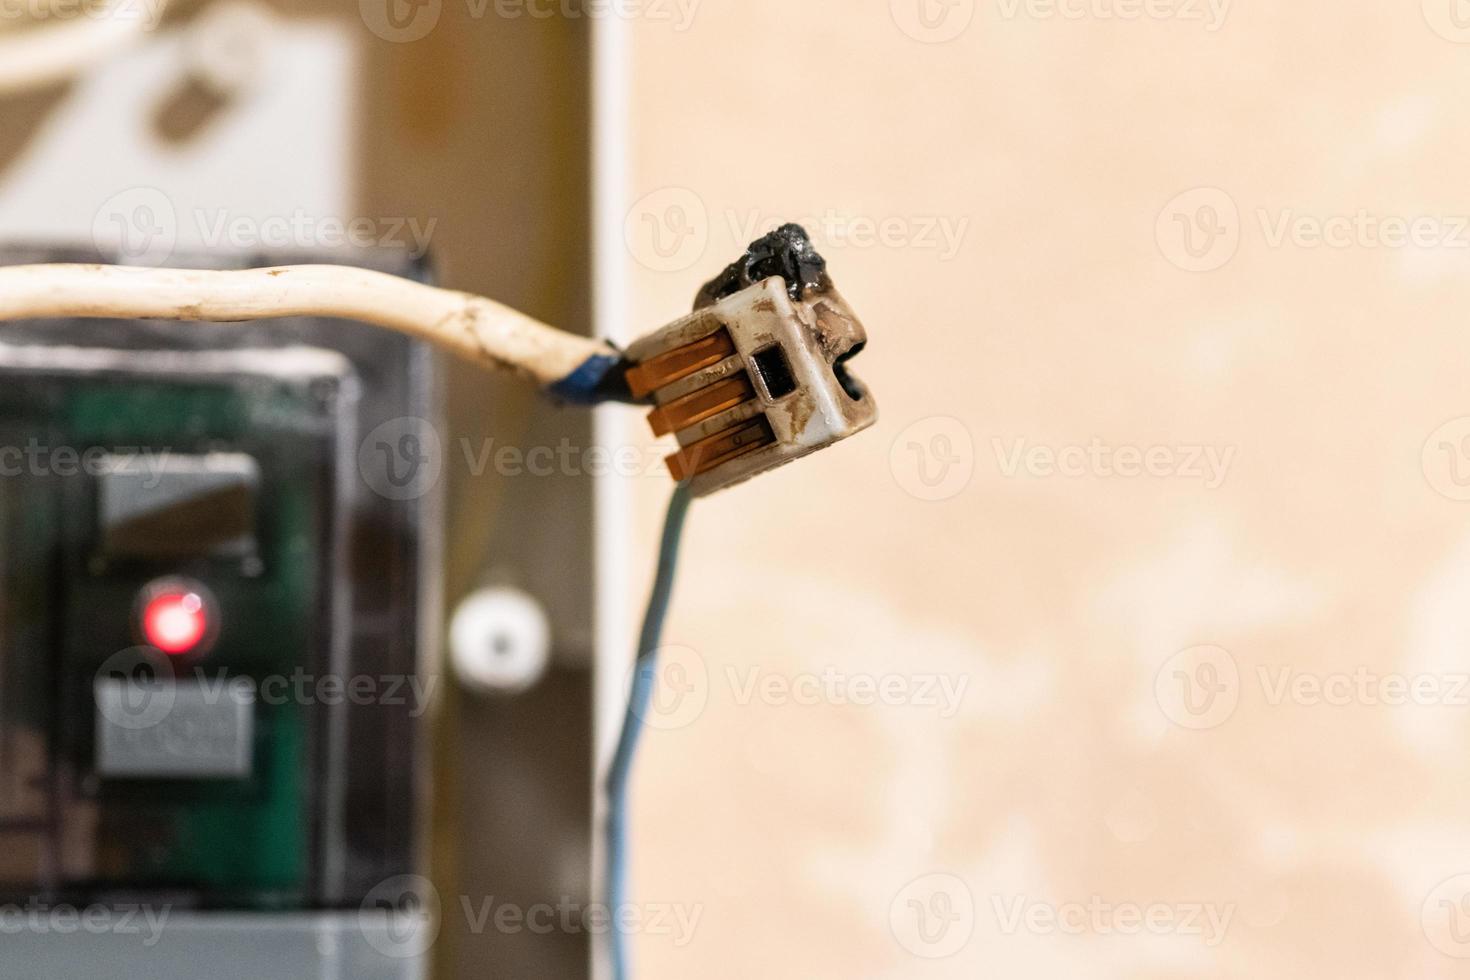 Burned wire, splicing connector, electrical terminal block of nonflammable, fireproof material. Faulty wiring or negligent electrical work. Dangerous short circuit accident. photo